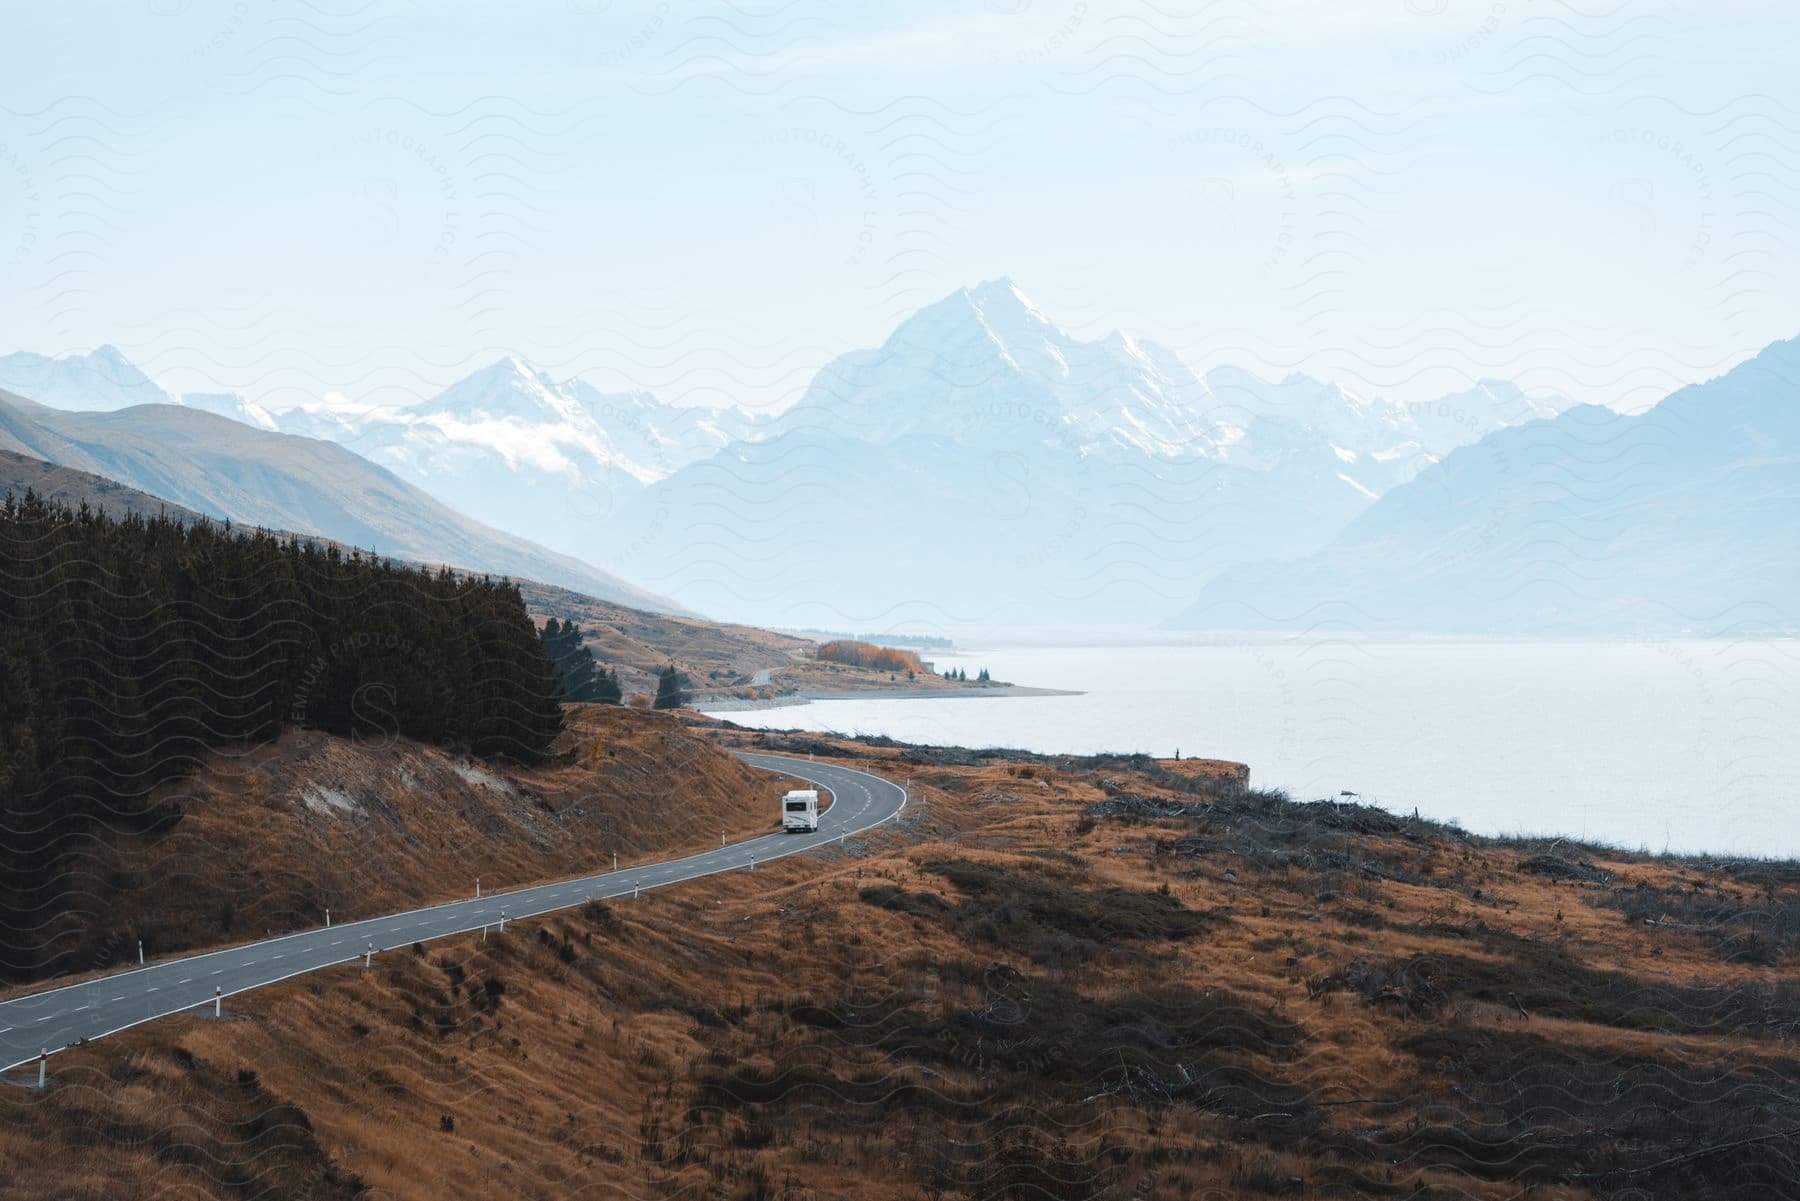 A camper drives down a rural highway below a mountain range in new zealand